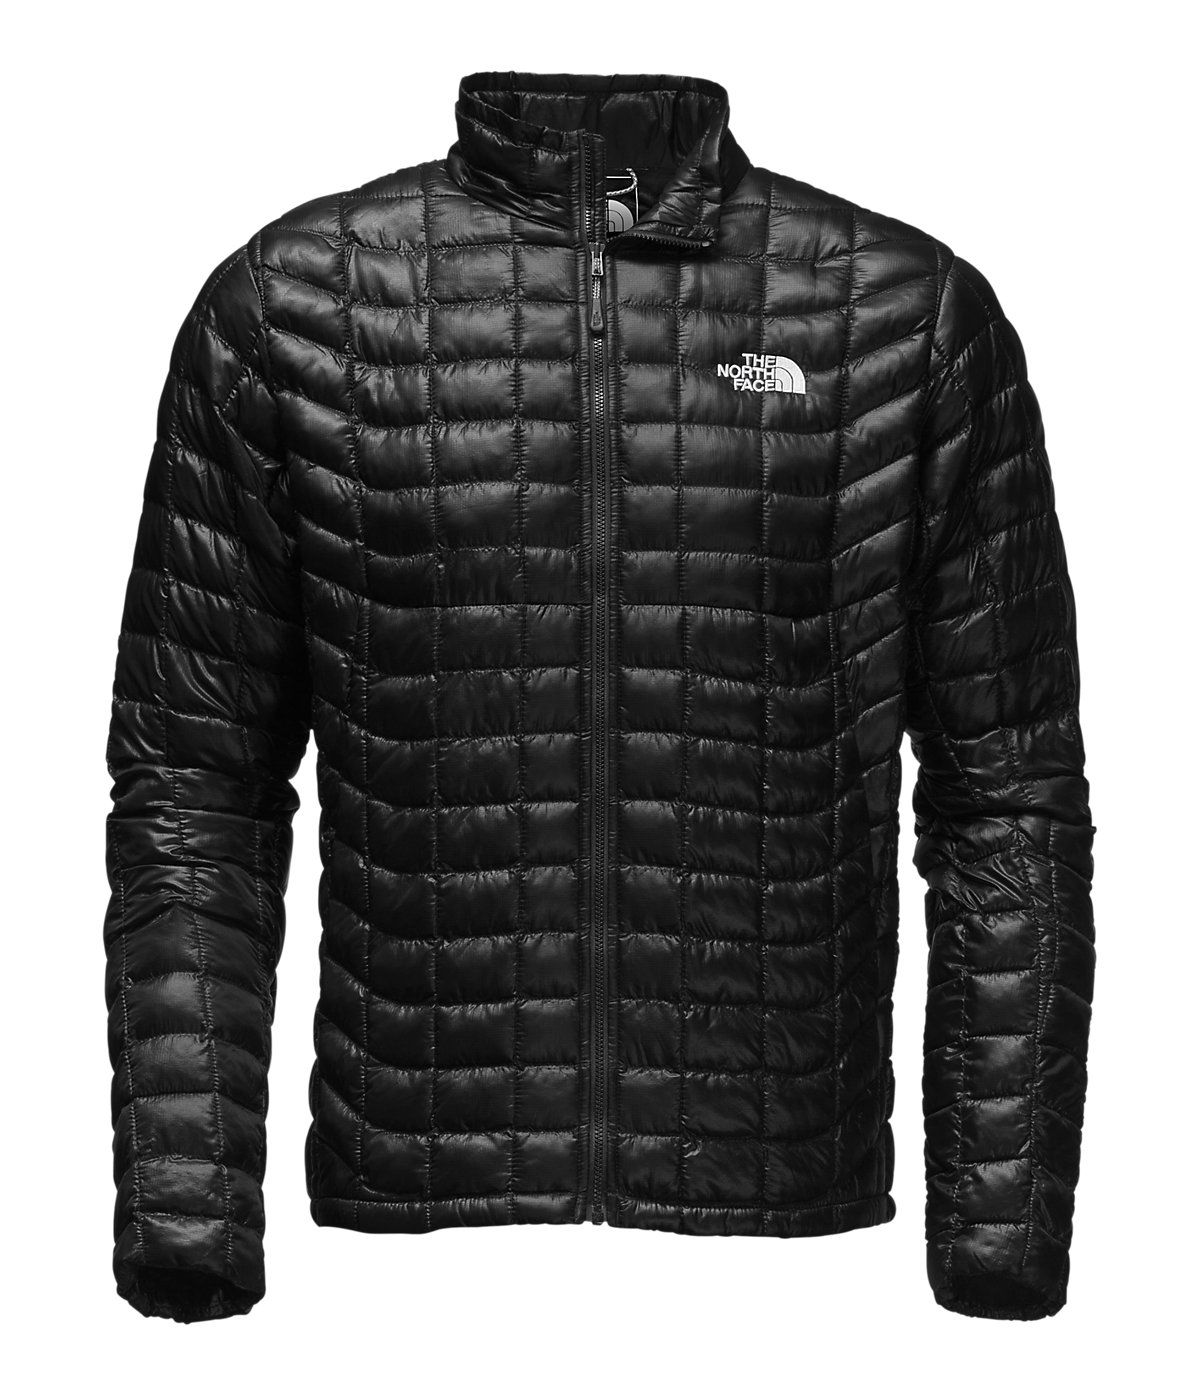 Thermoball Full Zip Jacket